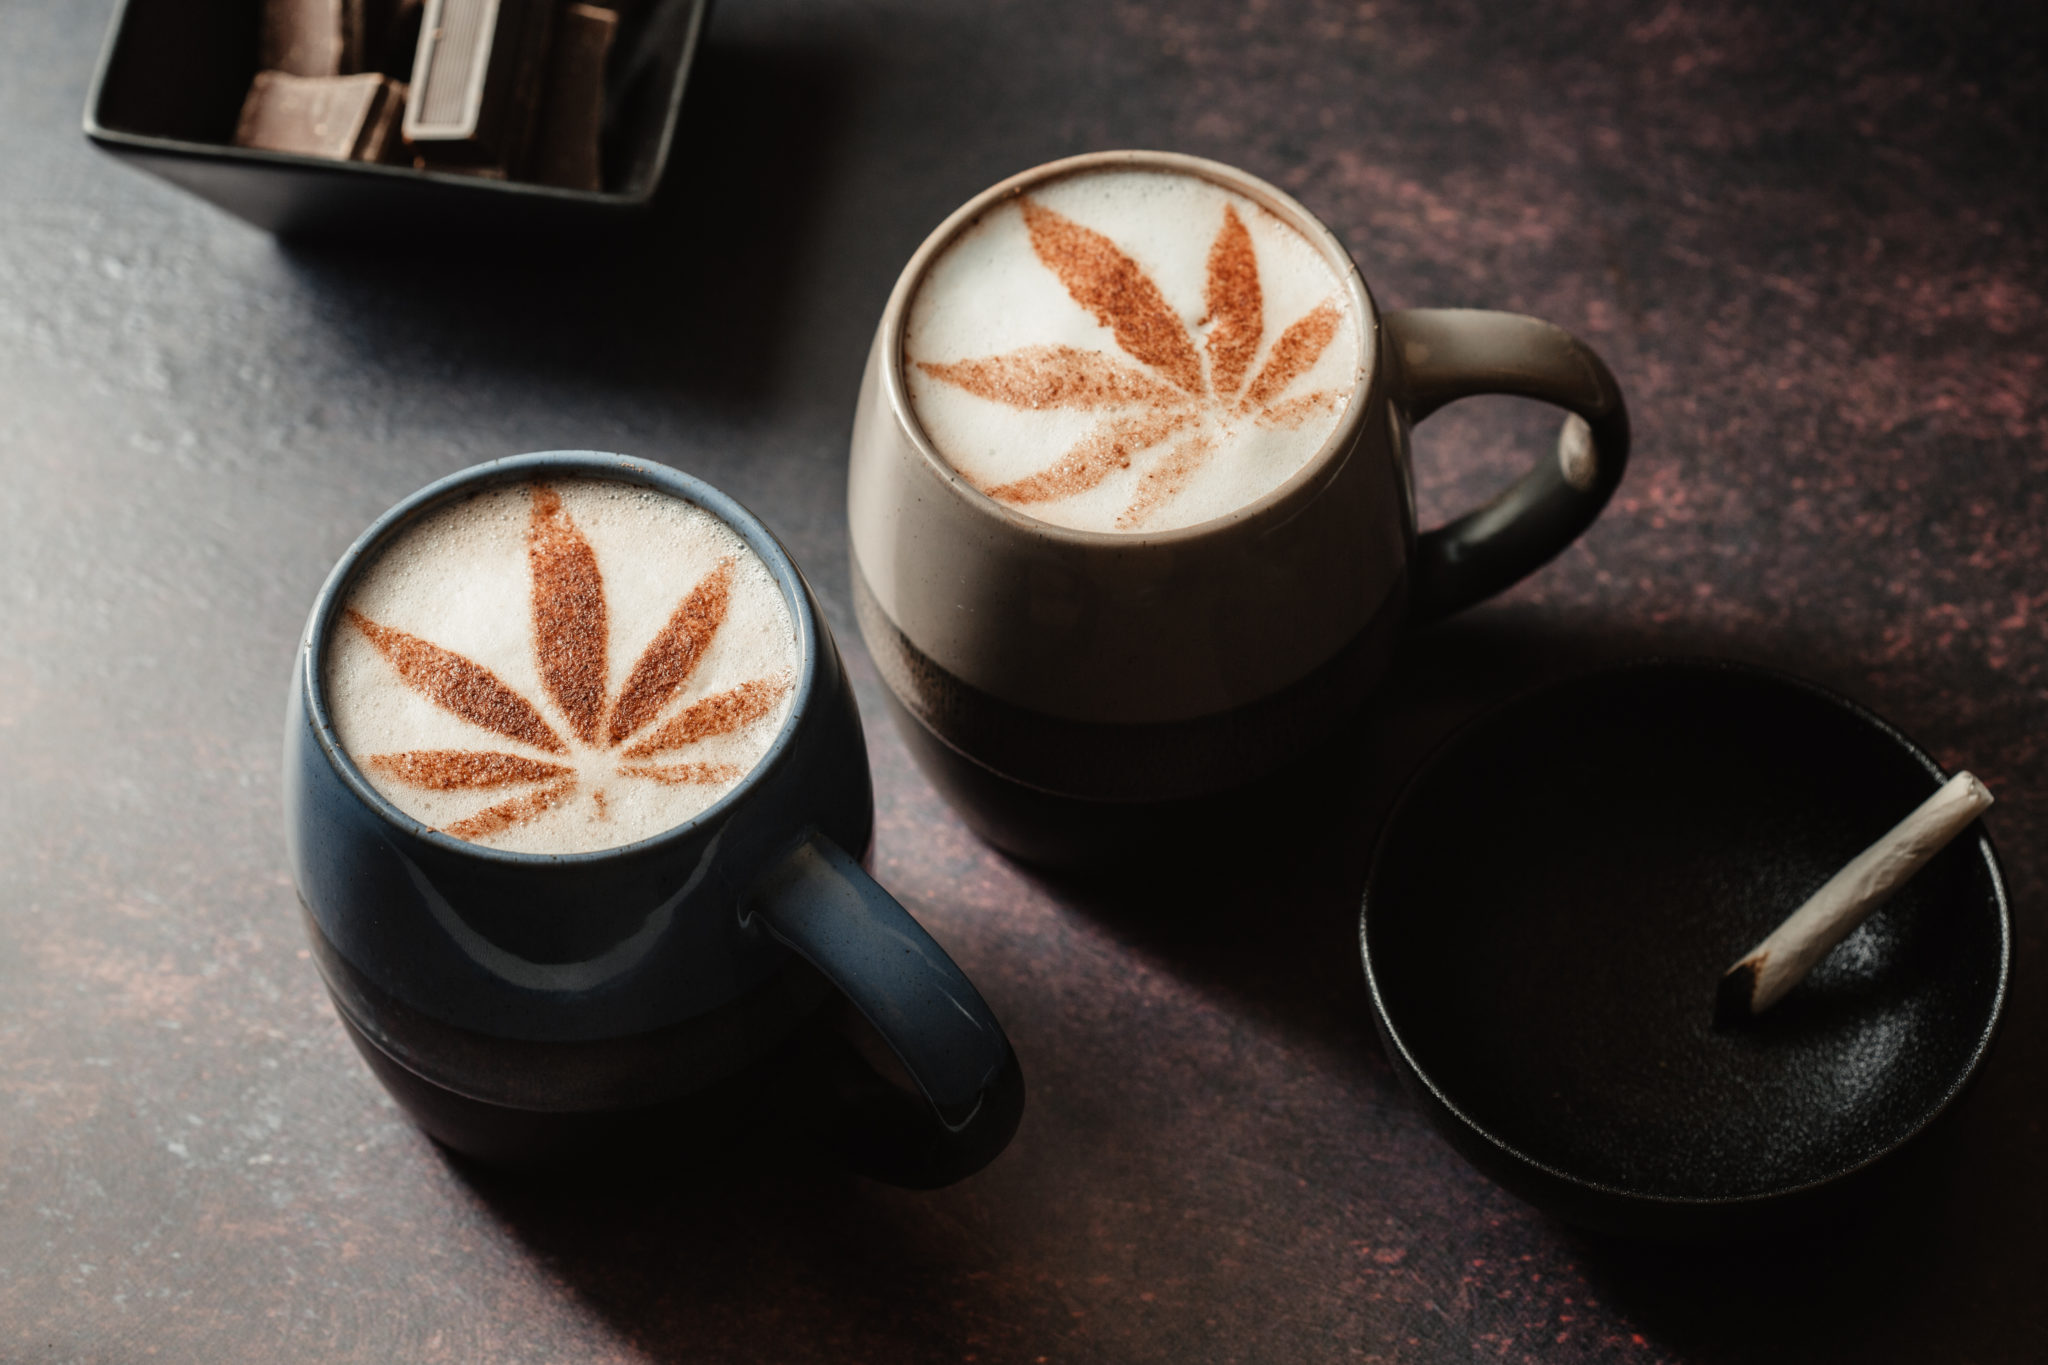 5 Things to Know About Cannabis Infused Drinks